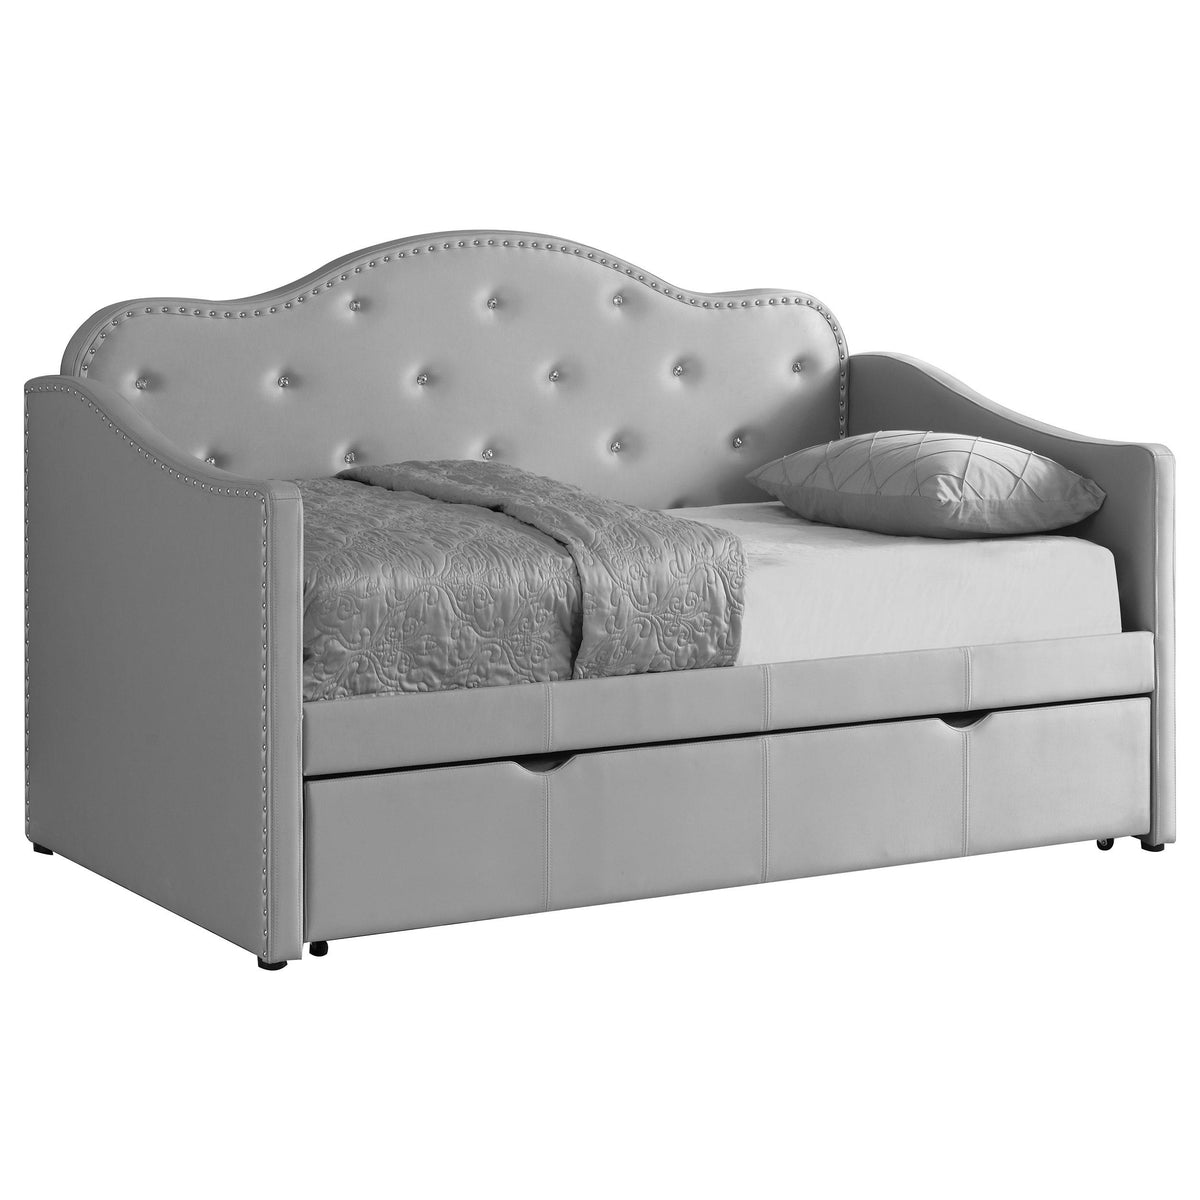 Elmore Upholstered Twin Daybed with Trundle Pearlescent Grey Elmore Upholstered Twin Daybed with Trundle Pearlescent Grey Half Price Furniture